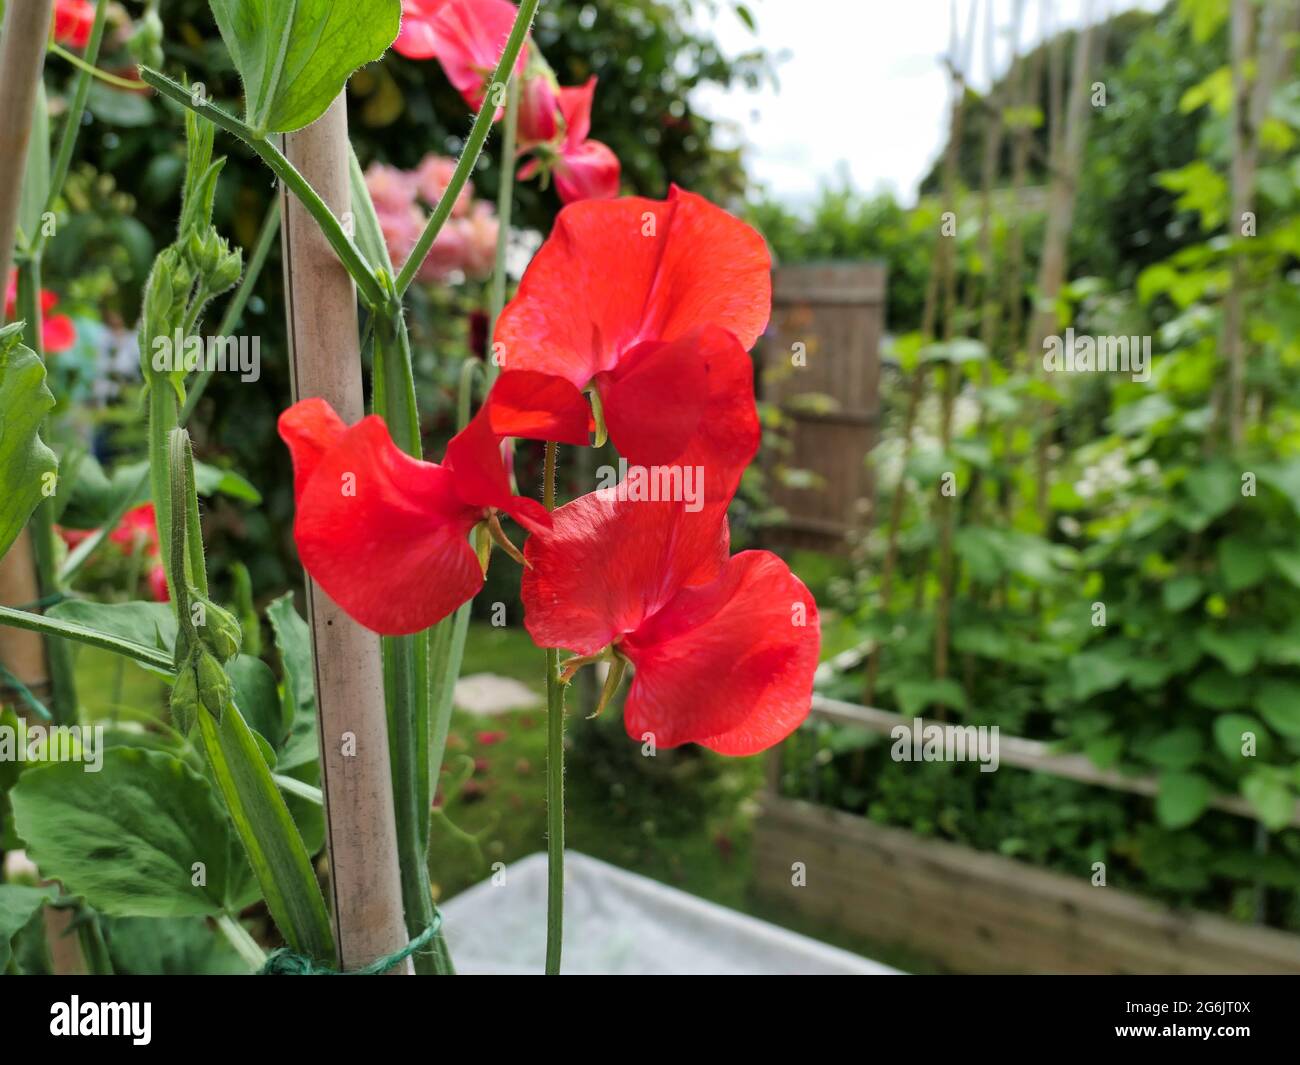 Sweet pea “Red Ensign” Stock Photo